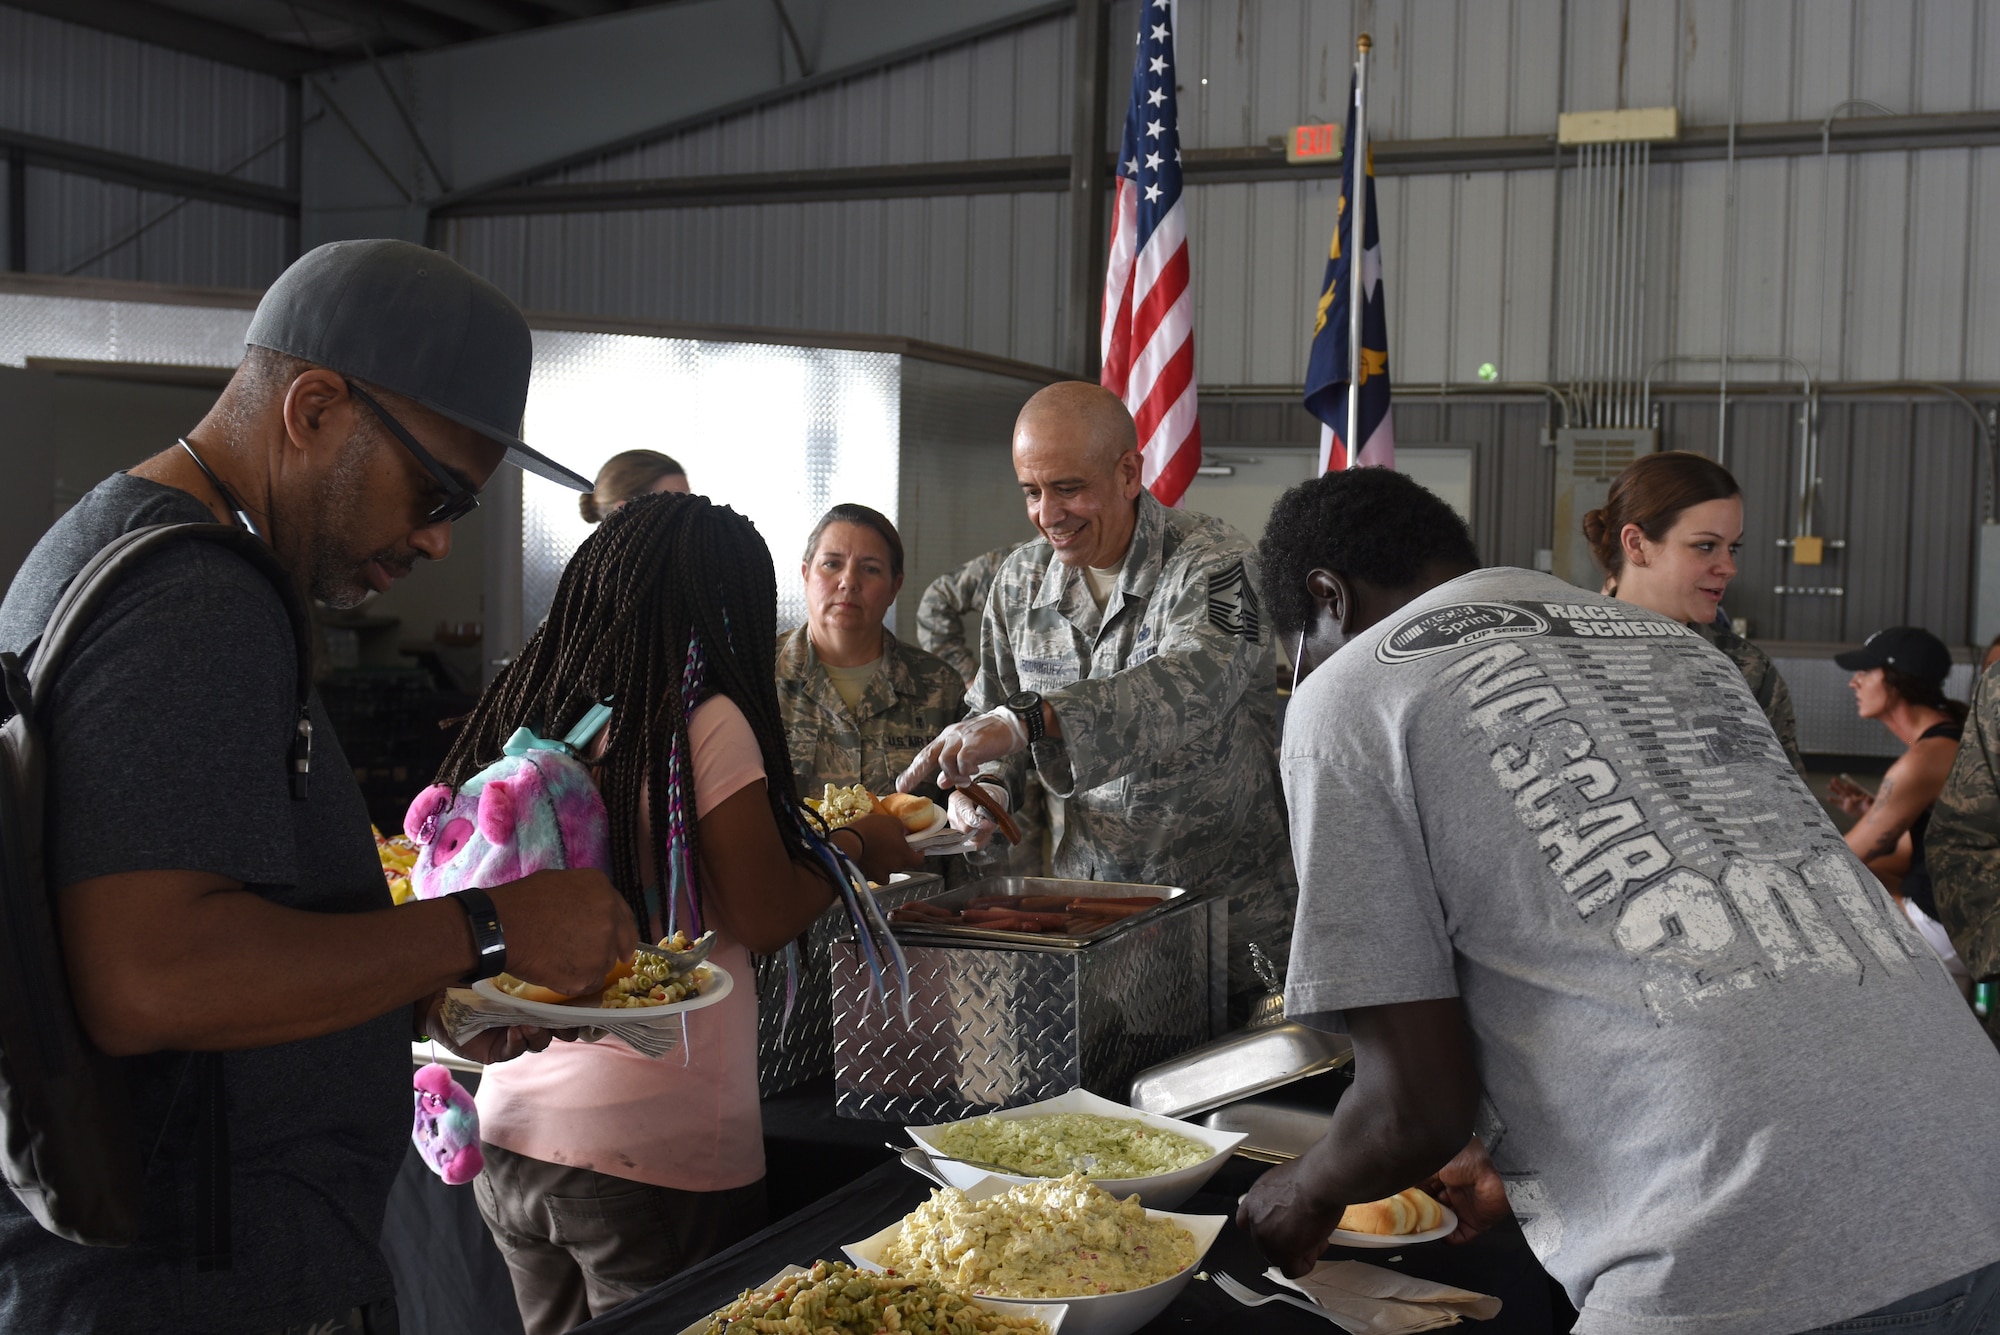 North Carolina National Guard State Command Chief Master Sgt. David Rodriguez (center), serves food to participants and their families at the Z-Max Pavilion, Charlotte N.C., during the annual Special Olympics Day at the Races, May 24, 2018. The Special Olympics Day at the Races is an annual celebration held at the Lowes Motor Speedway and is put on by Vangie Boswell and fourteen sponsors including the NCANG. Members of the NCANG help set-up the event and pass out mementos while mingling with State Special Olympians and their families.(U.S. Air Force photo by Staff Sgt. Laura J. Montgomery/Released)